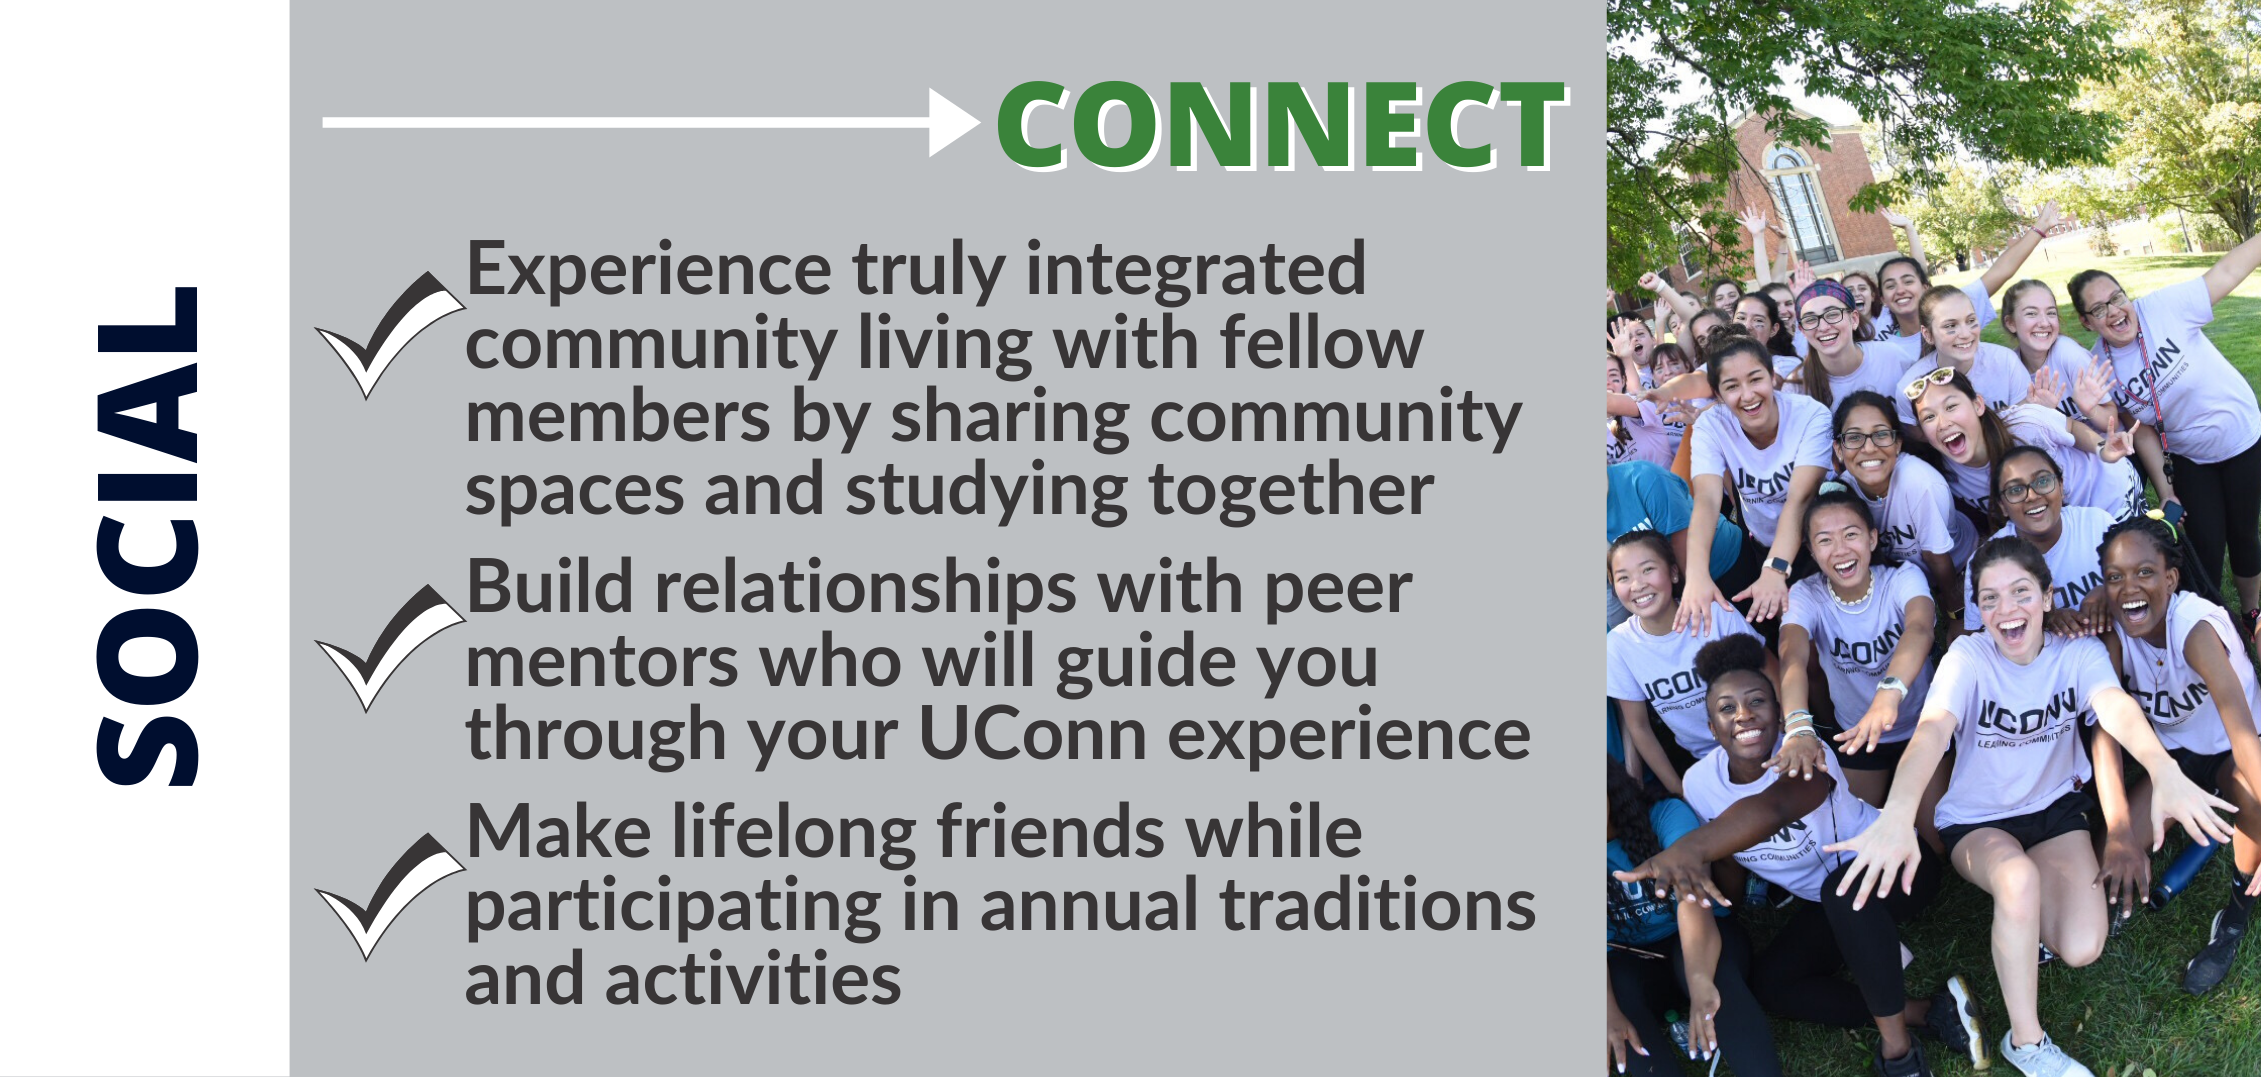 CONNECT: Experience truly integrated community living with fellow members by sharing community spaces and studying together Build relationships with peer mentors who will guide you through your UConn experience Make lifelong friends while participating in annual traditions and activities